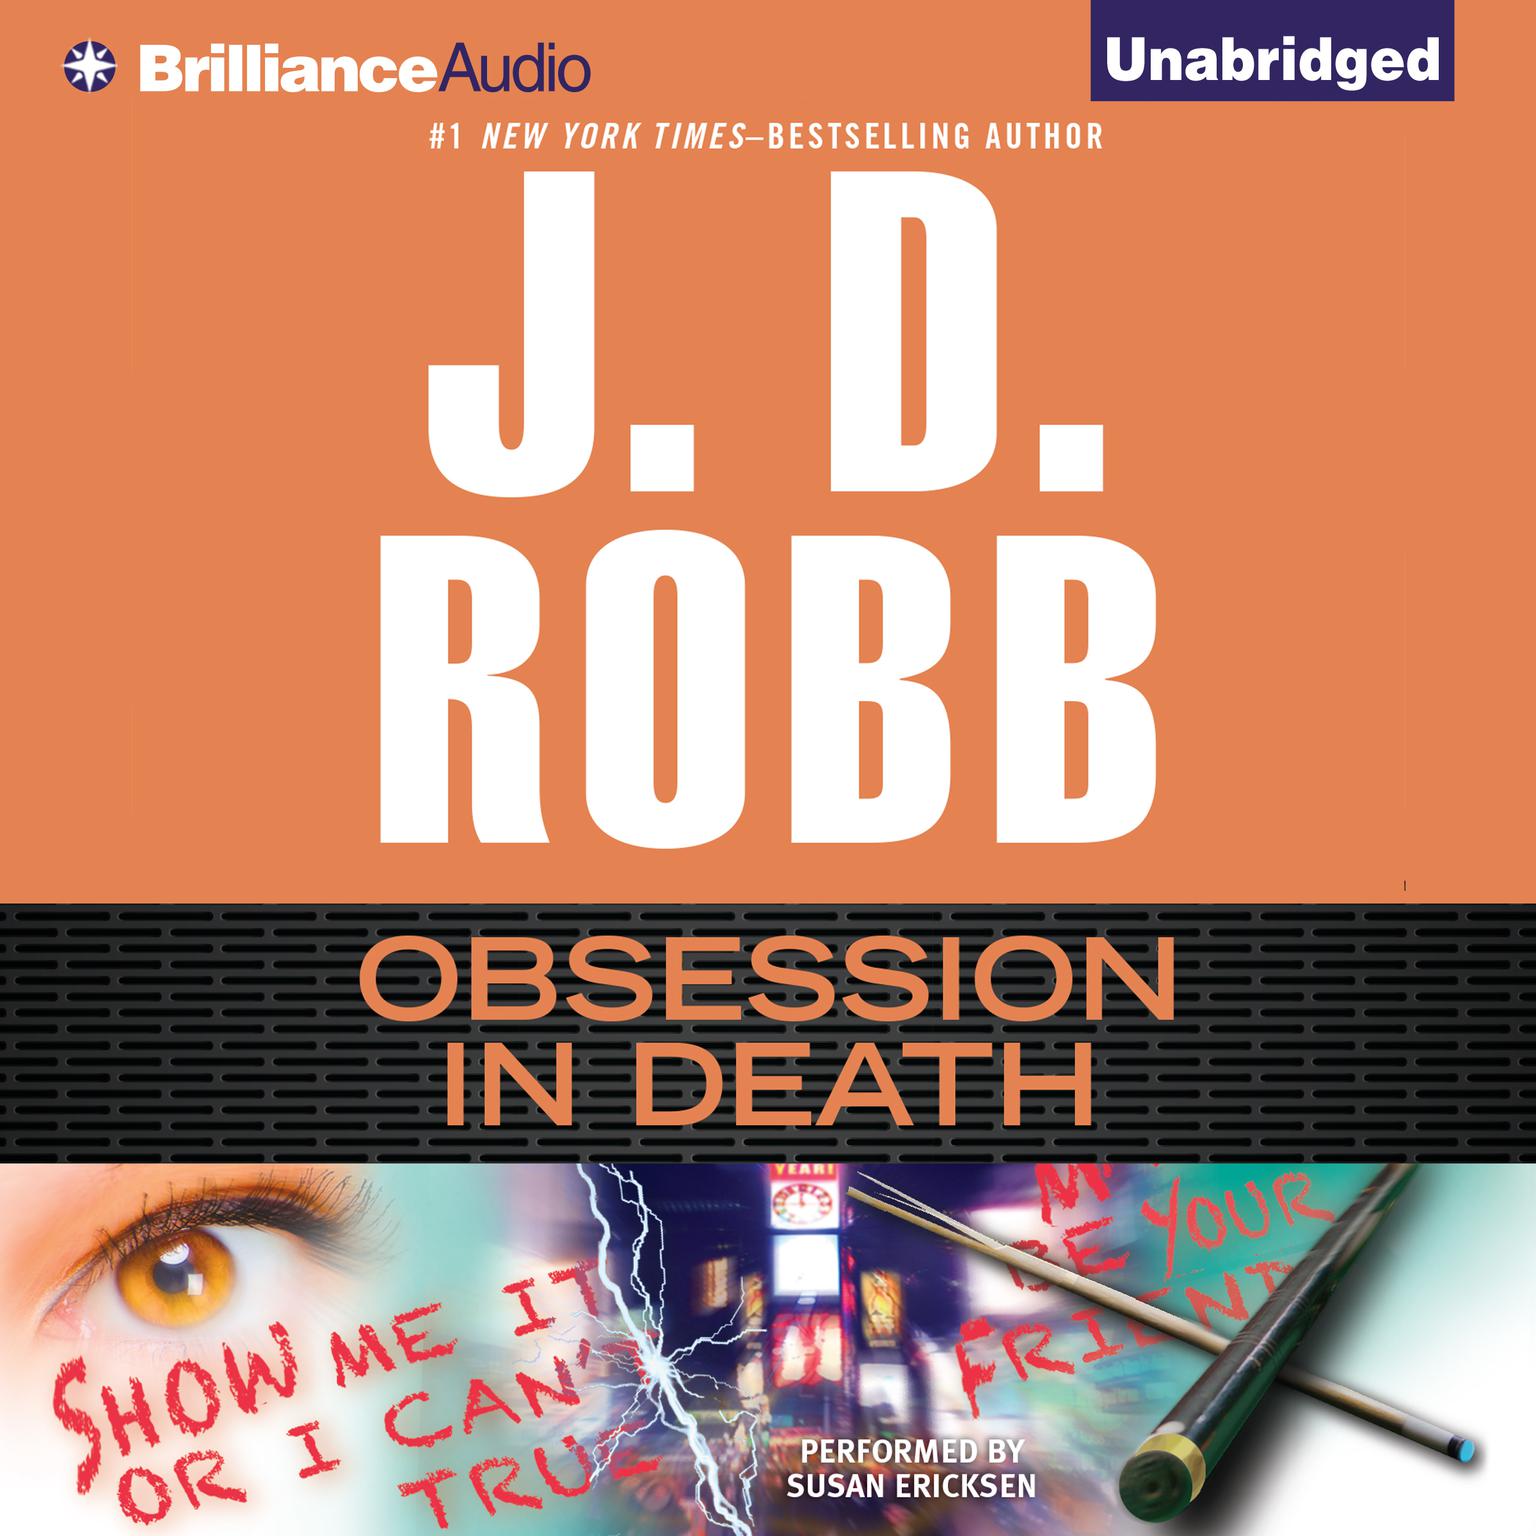 Obsession in Death Audiobook, by J. D. Robb